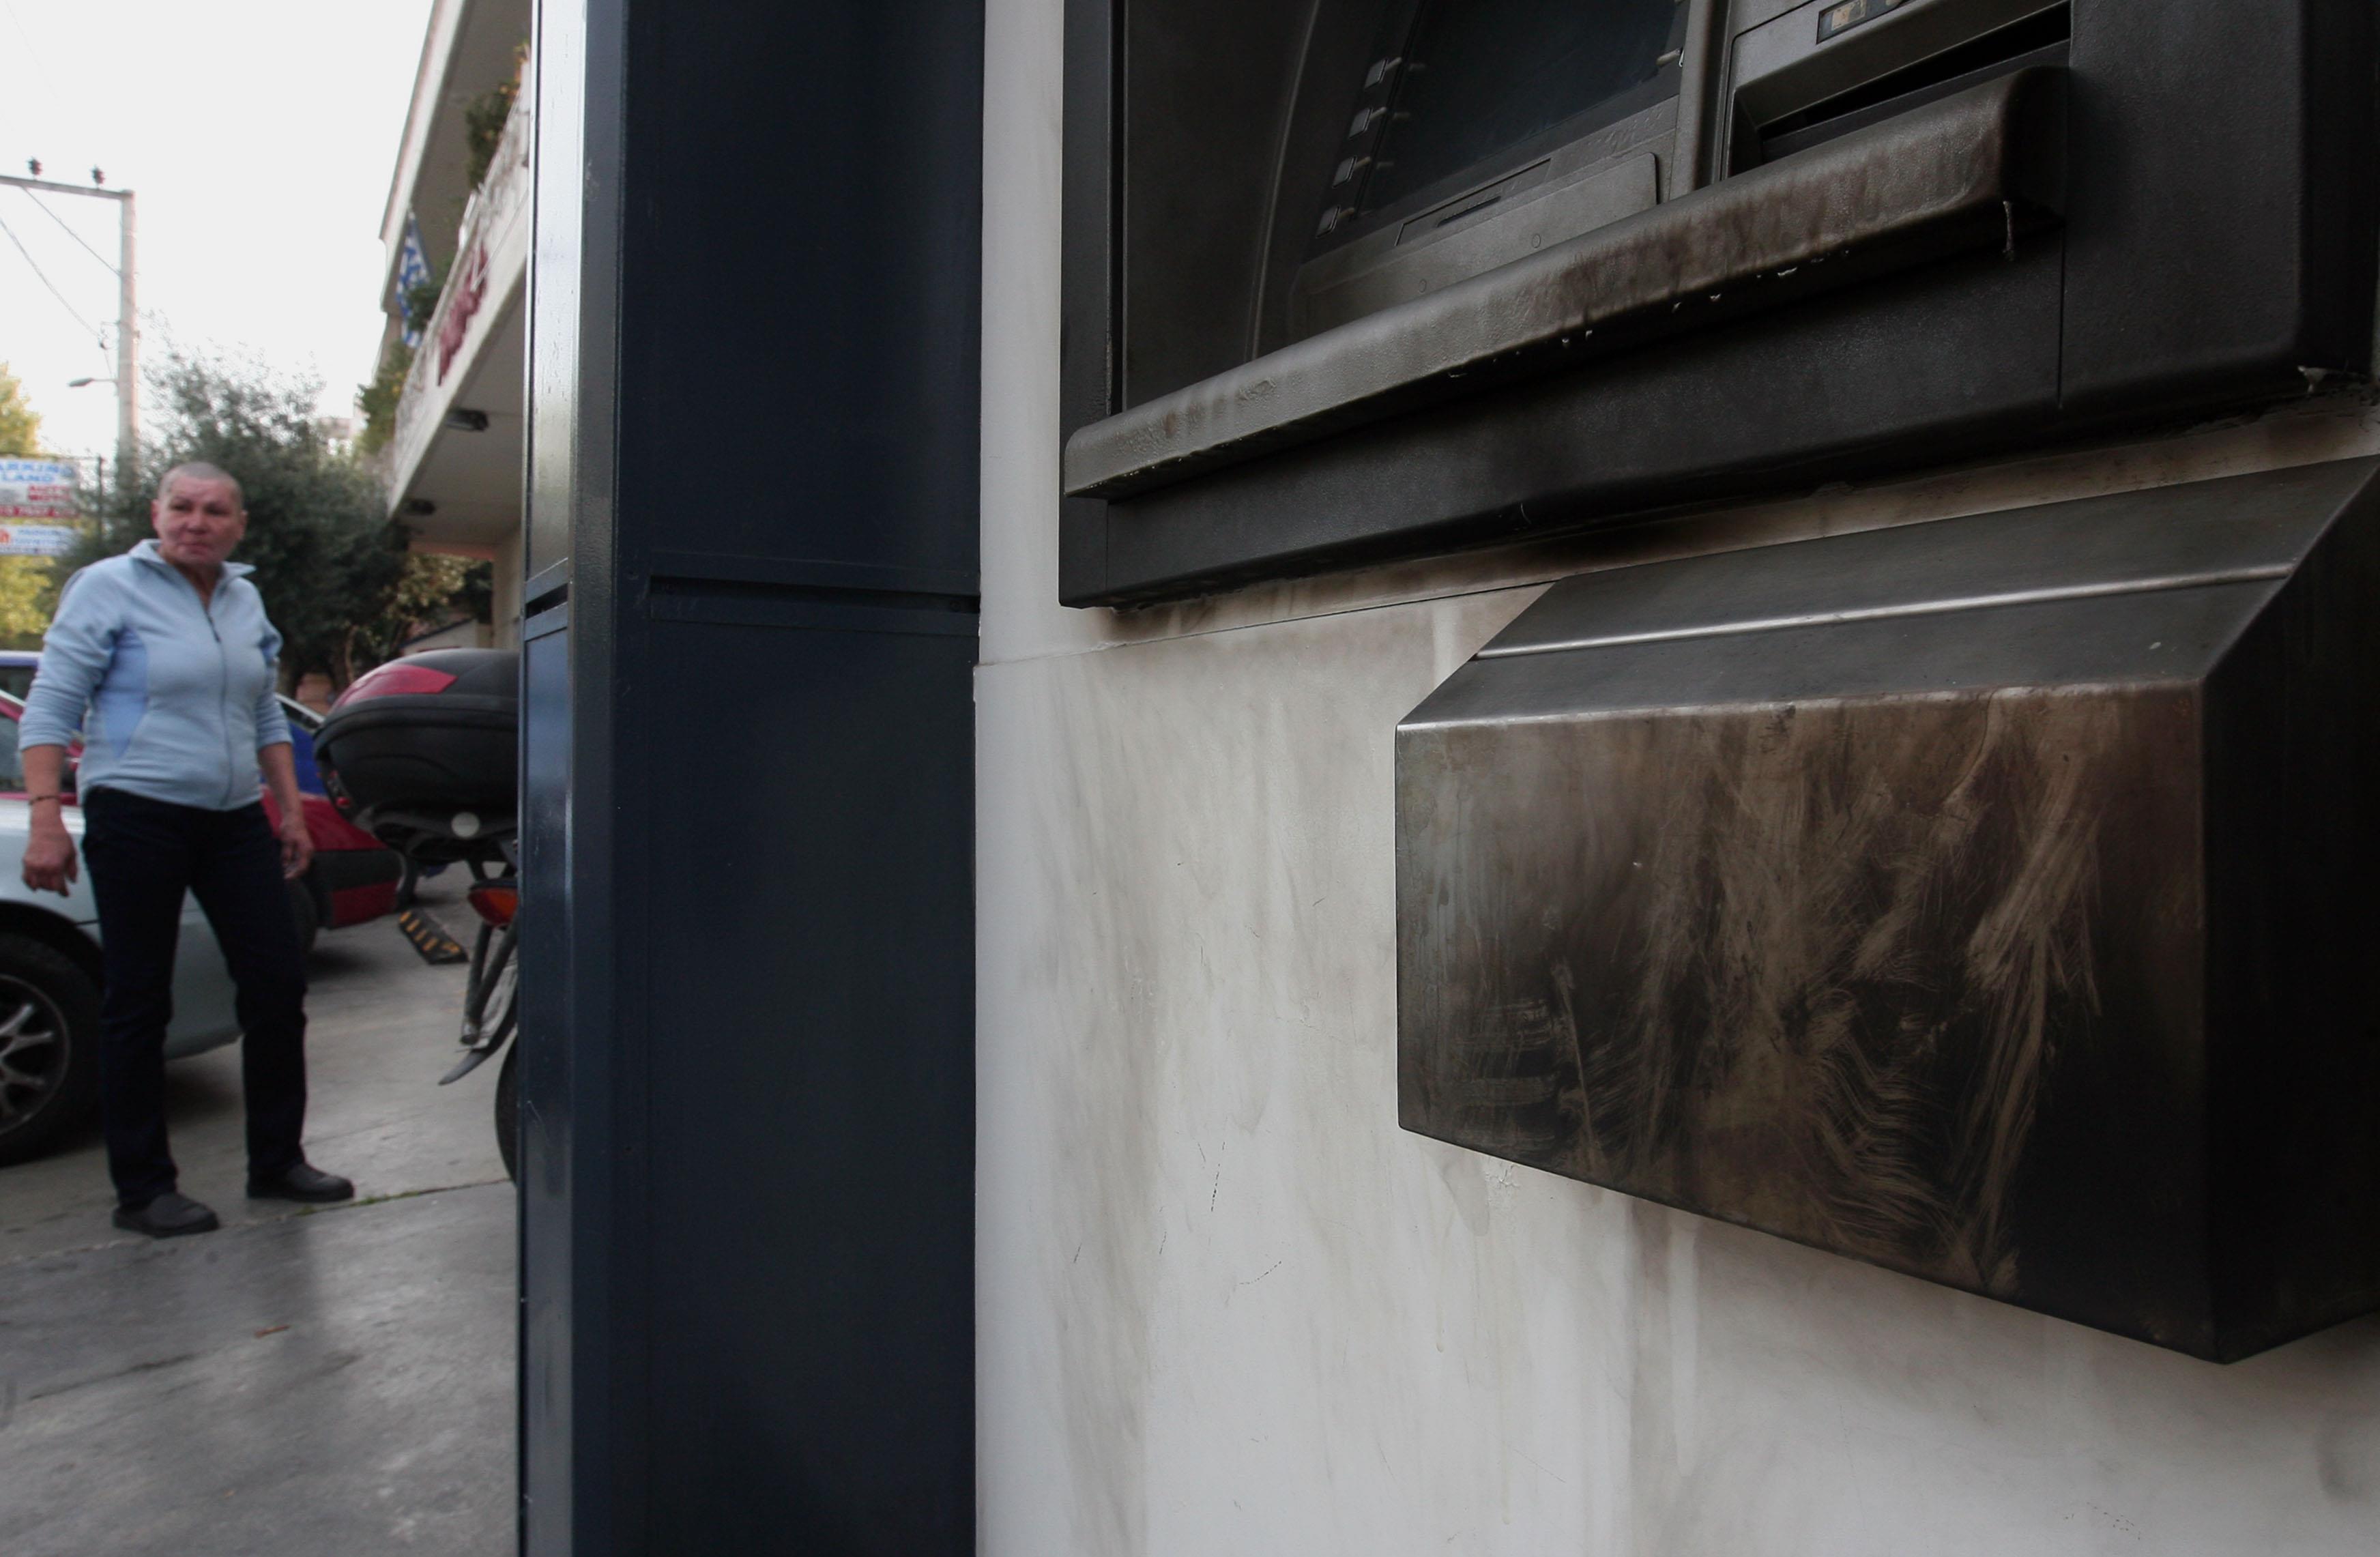 Alpha Bank ATM and store entrance damaged in bomb attack